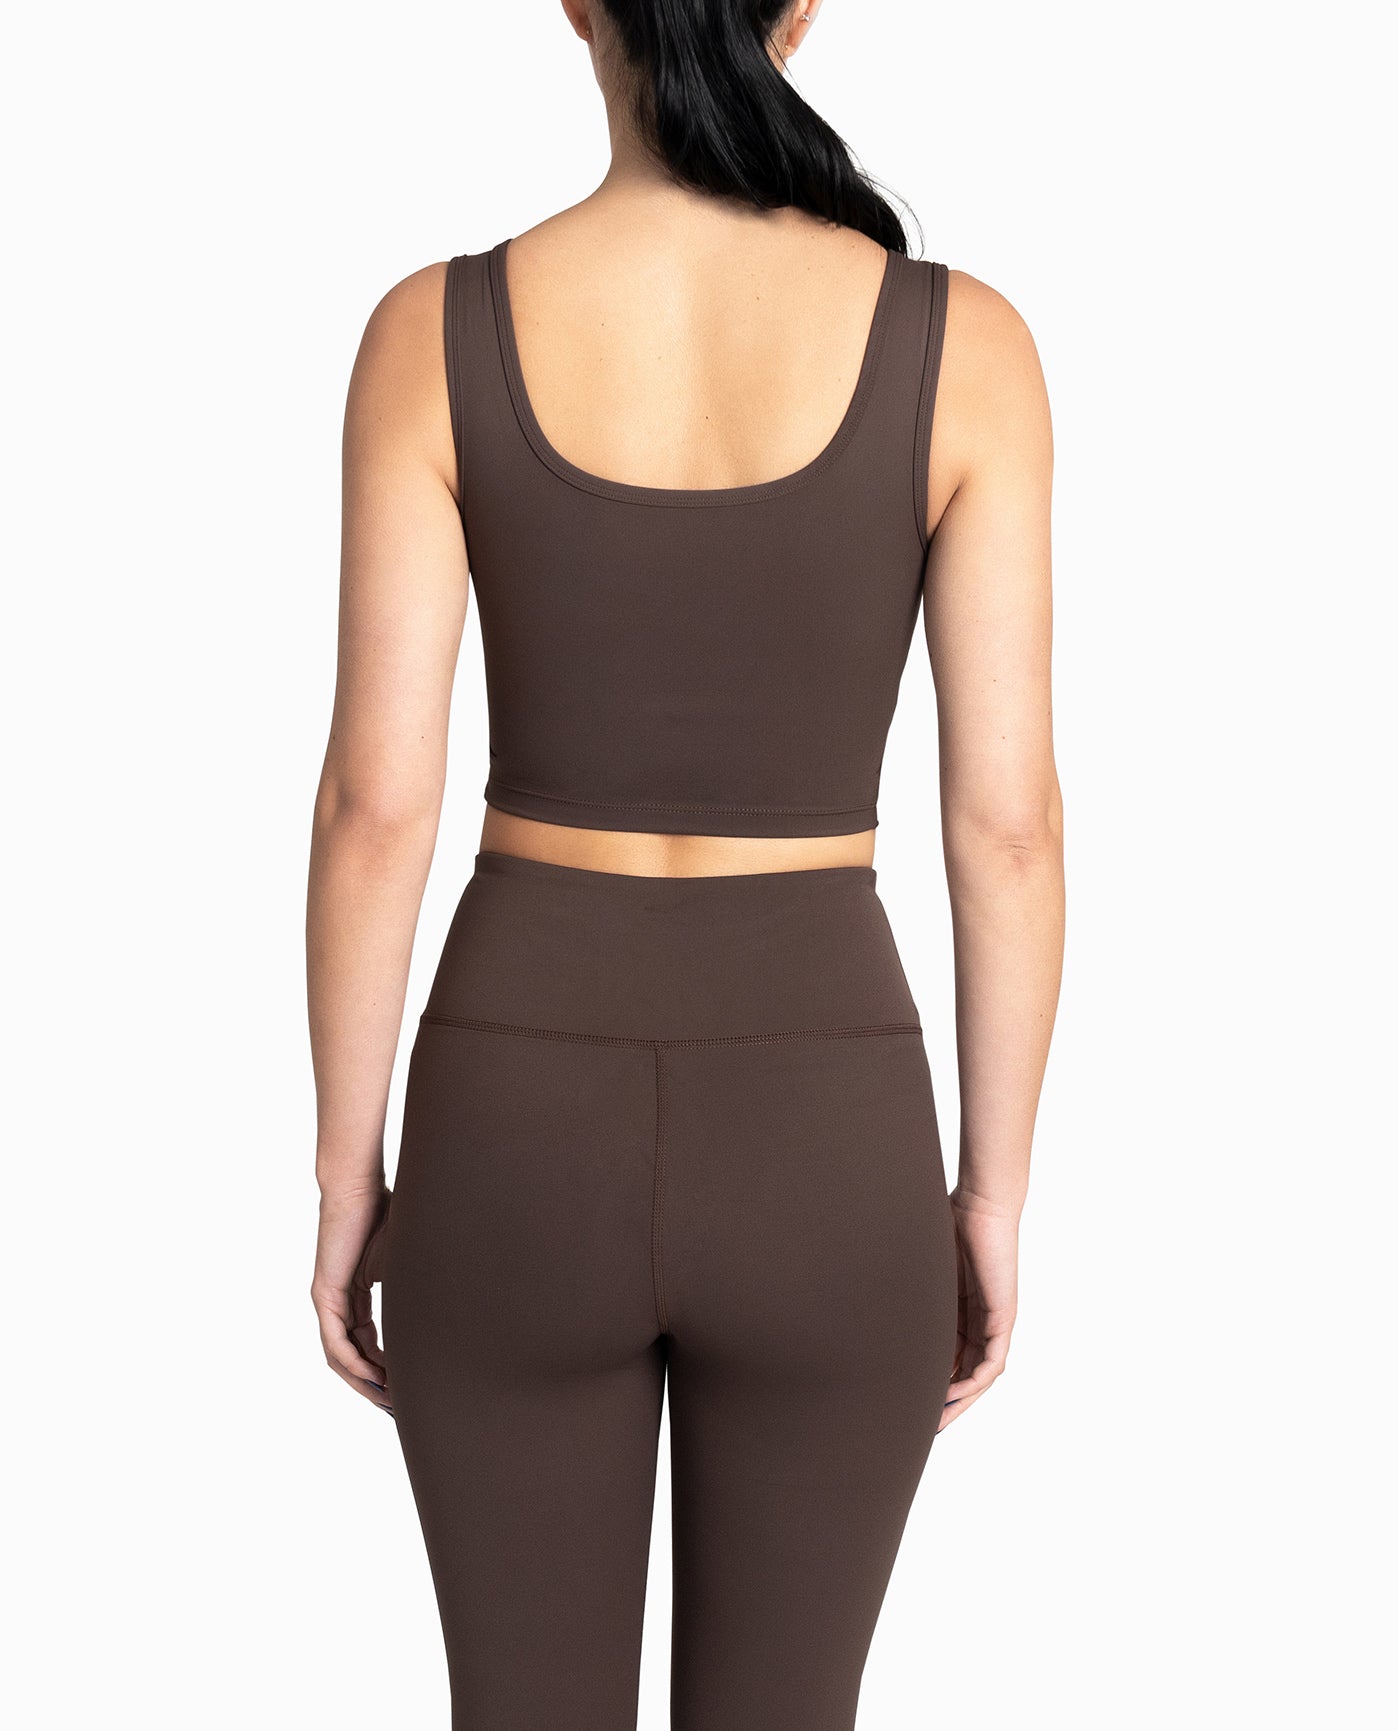 BACK OF SPORTS BRA TOP | Brown